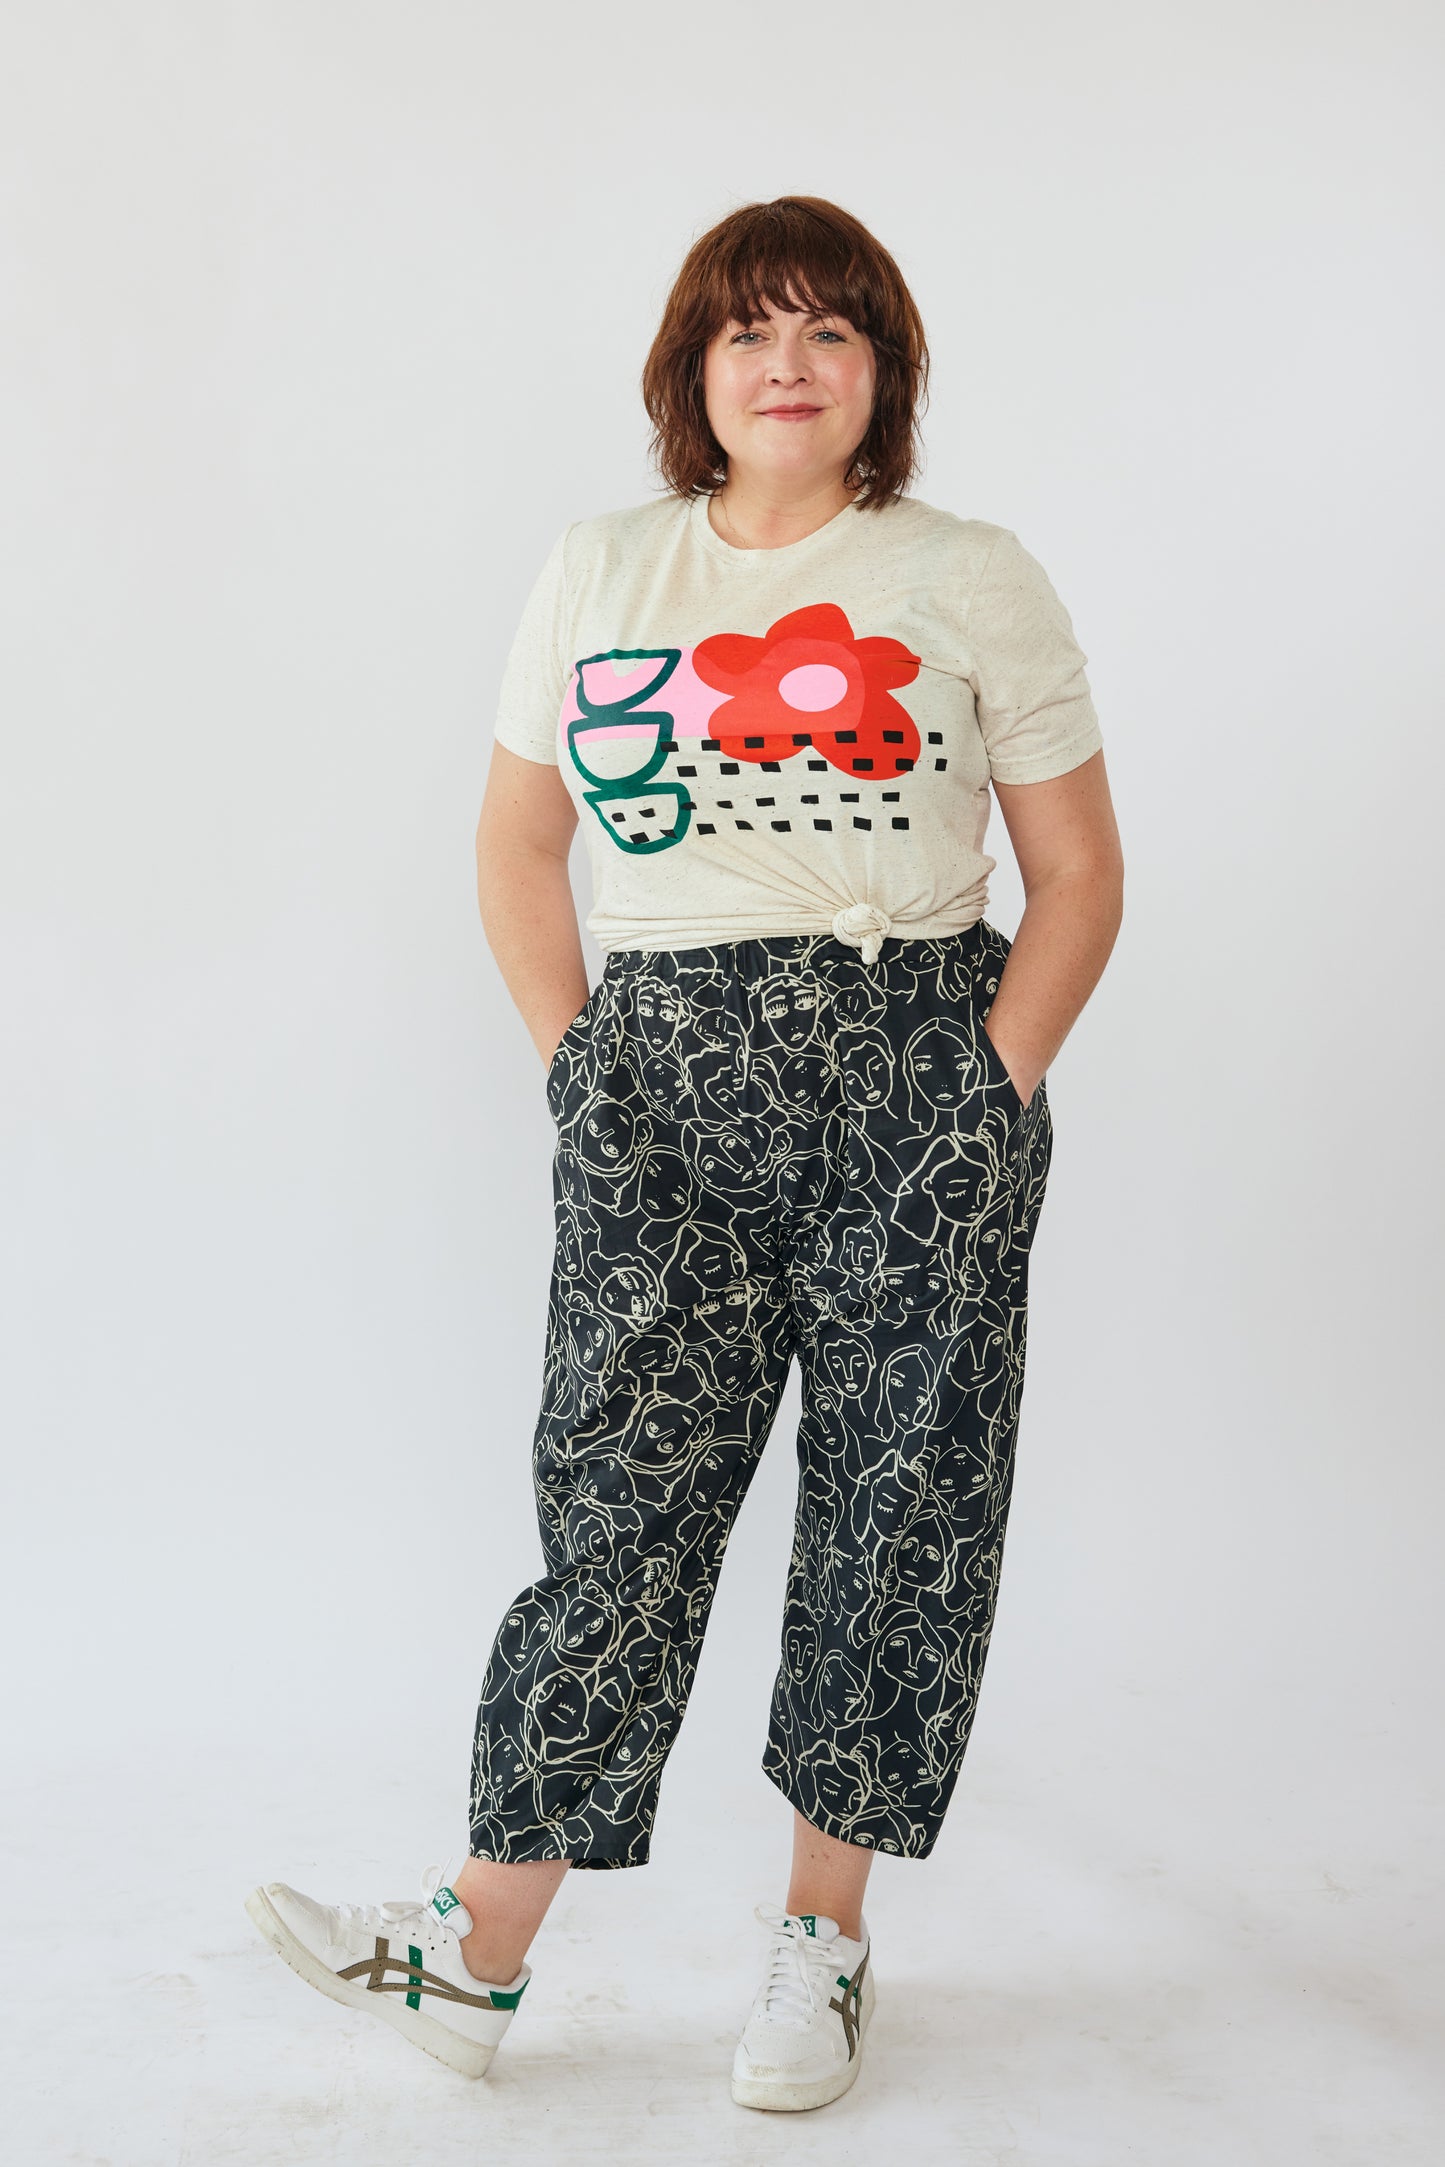 Grown-up Balloon Pants - Oh Lady